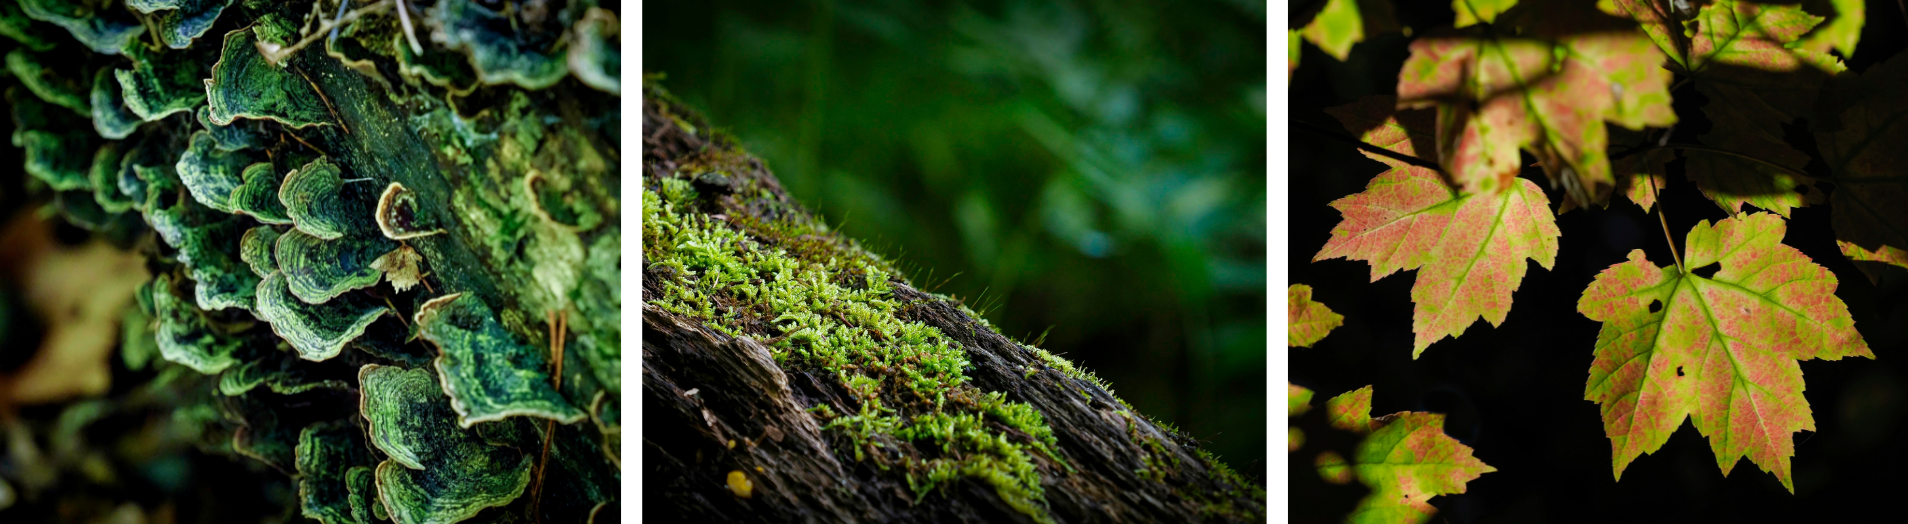 a triptych. from left to right, green shelf-like mushrooms growing on a tree branch; a closeup of green moss on a tree trunk with a blurred emerald green background; and autumn leaves speckled with orange over a lighter lime green and a dark background